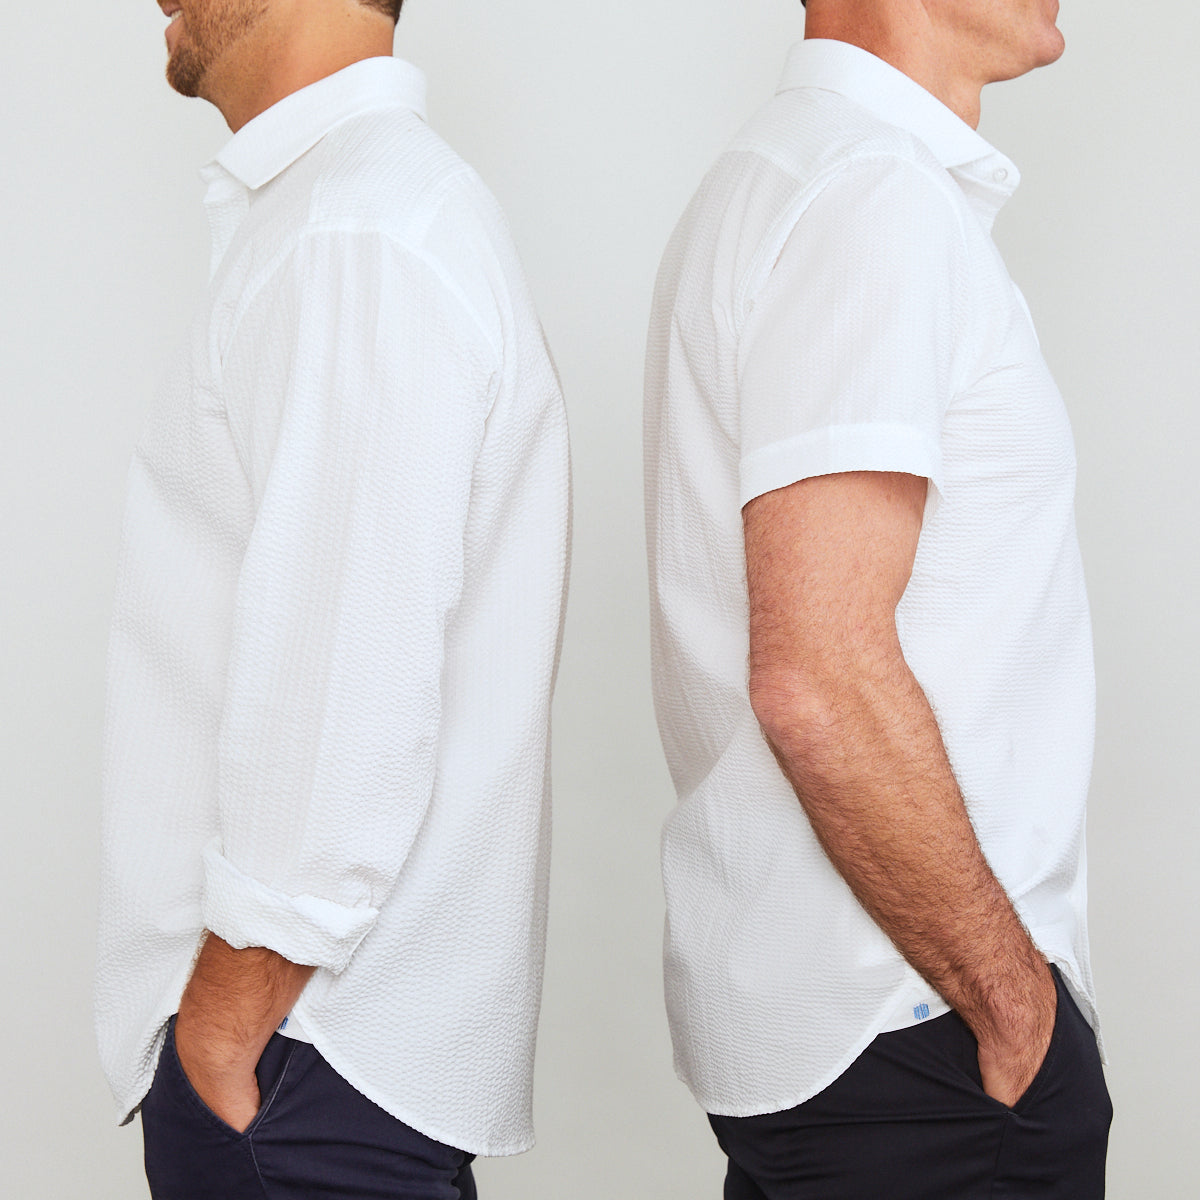 A solid look for a solid guy. THE white shirt you need this season. Seersucker, lightweight, and supremely cool. Available in short or long sleeve.  100% Cotton Seersucker  •  Spread Collar  •  Short Sleeve  •  Contrast Buttons  •  Chest Pocket  •  Machine Washable  •  Made in Italy